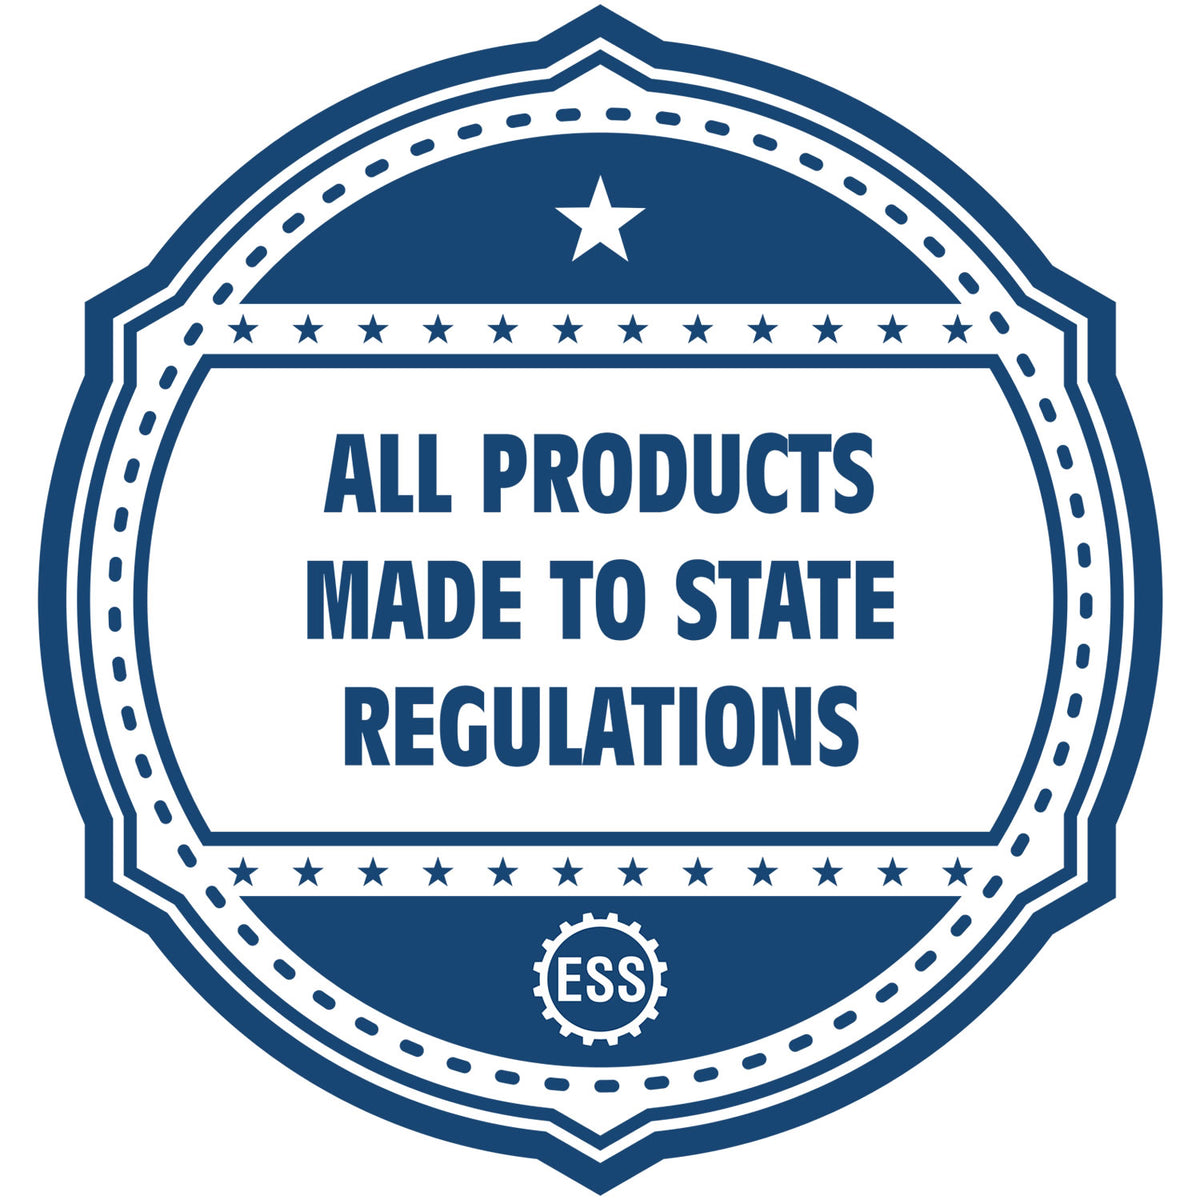 An icon or badge element for the Soft Washington Professional Engineer Seal showing that this product is made in compliance with state regulations.